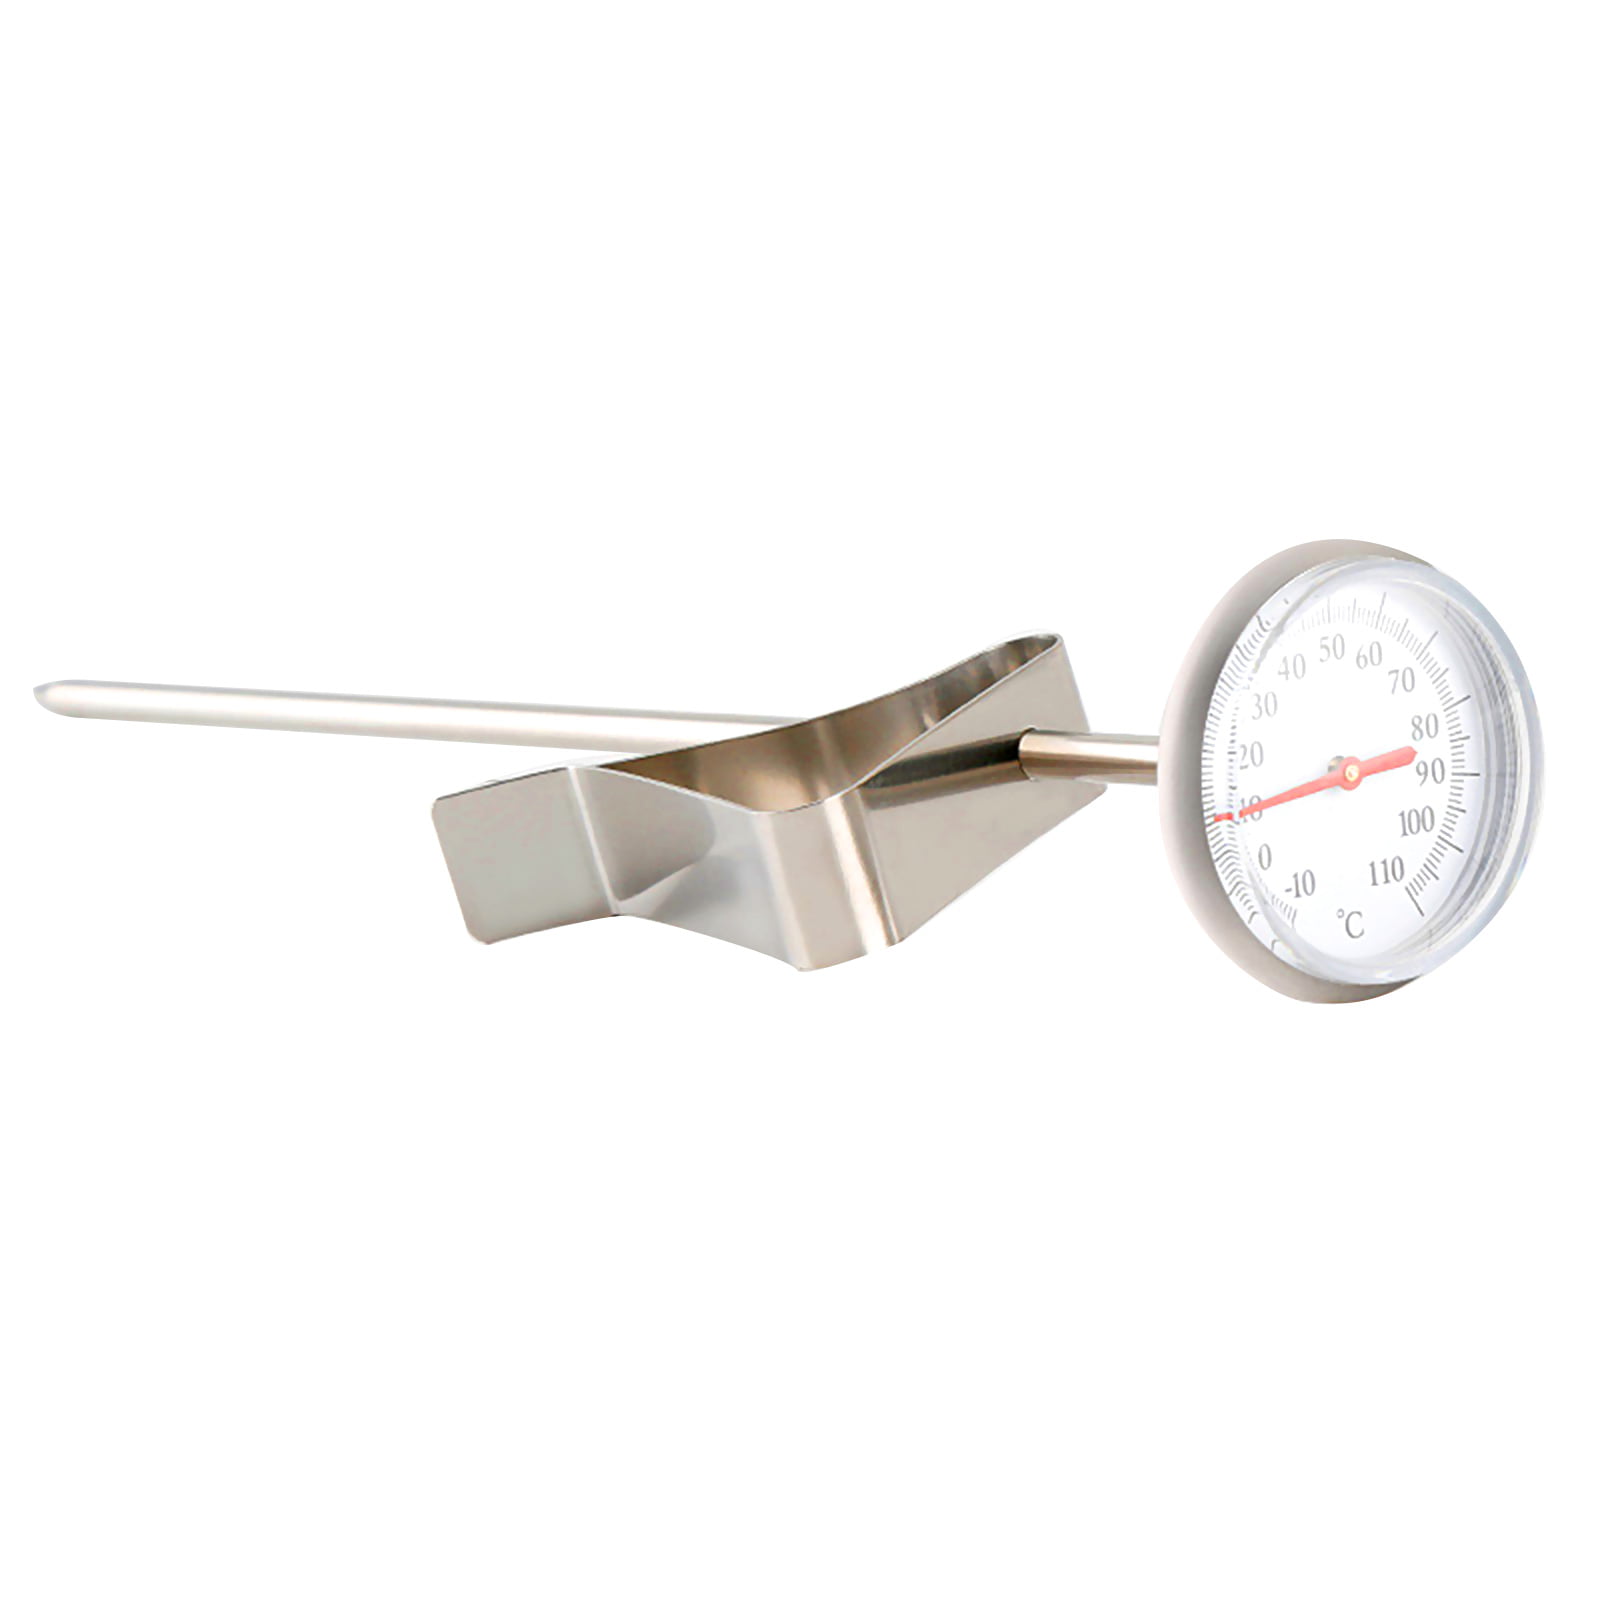 Chocolate Soups Gadget Long Probe Coffee Milk Thermometer with Clip Stocks